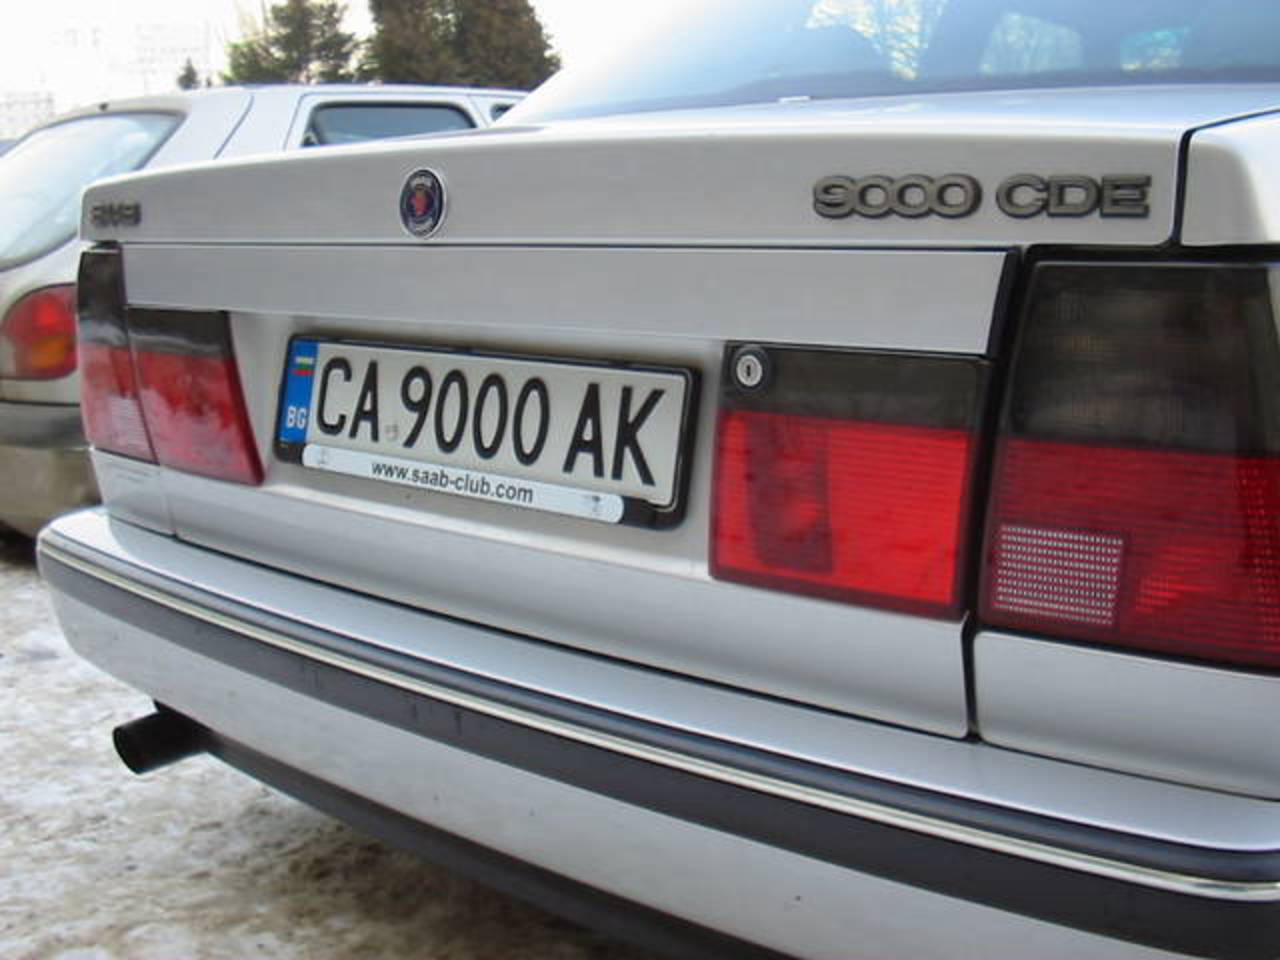 Andy"s Saab 9000 CDE from Bulgaria